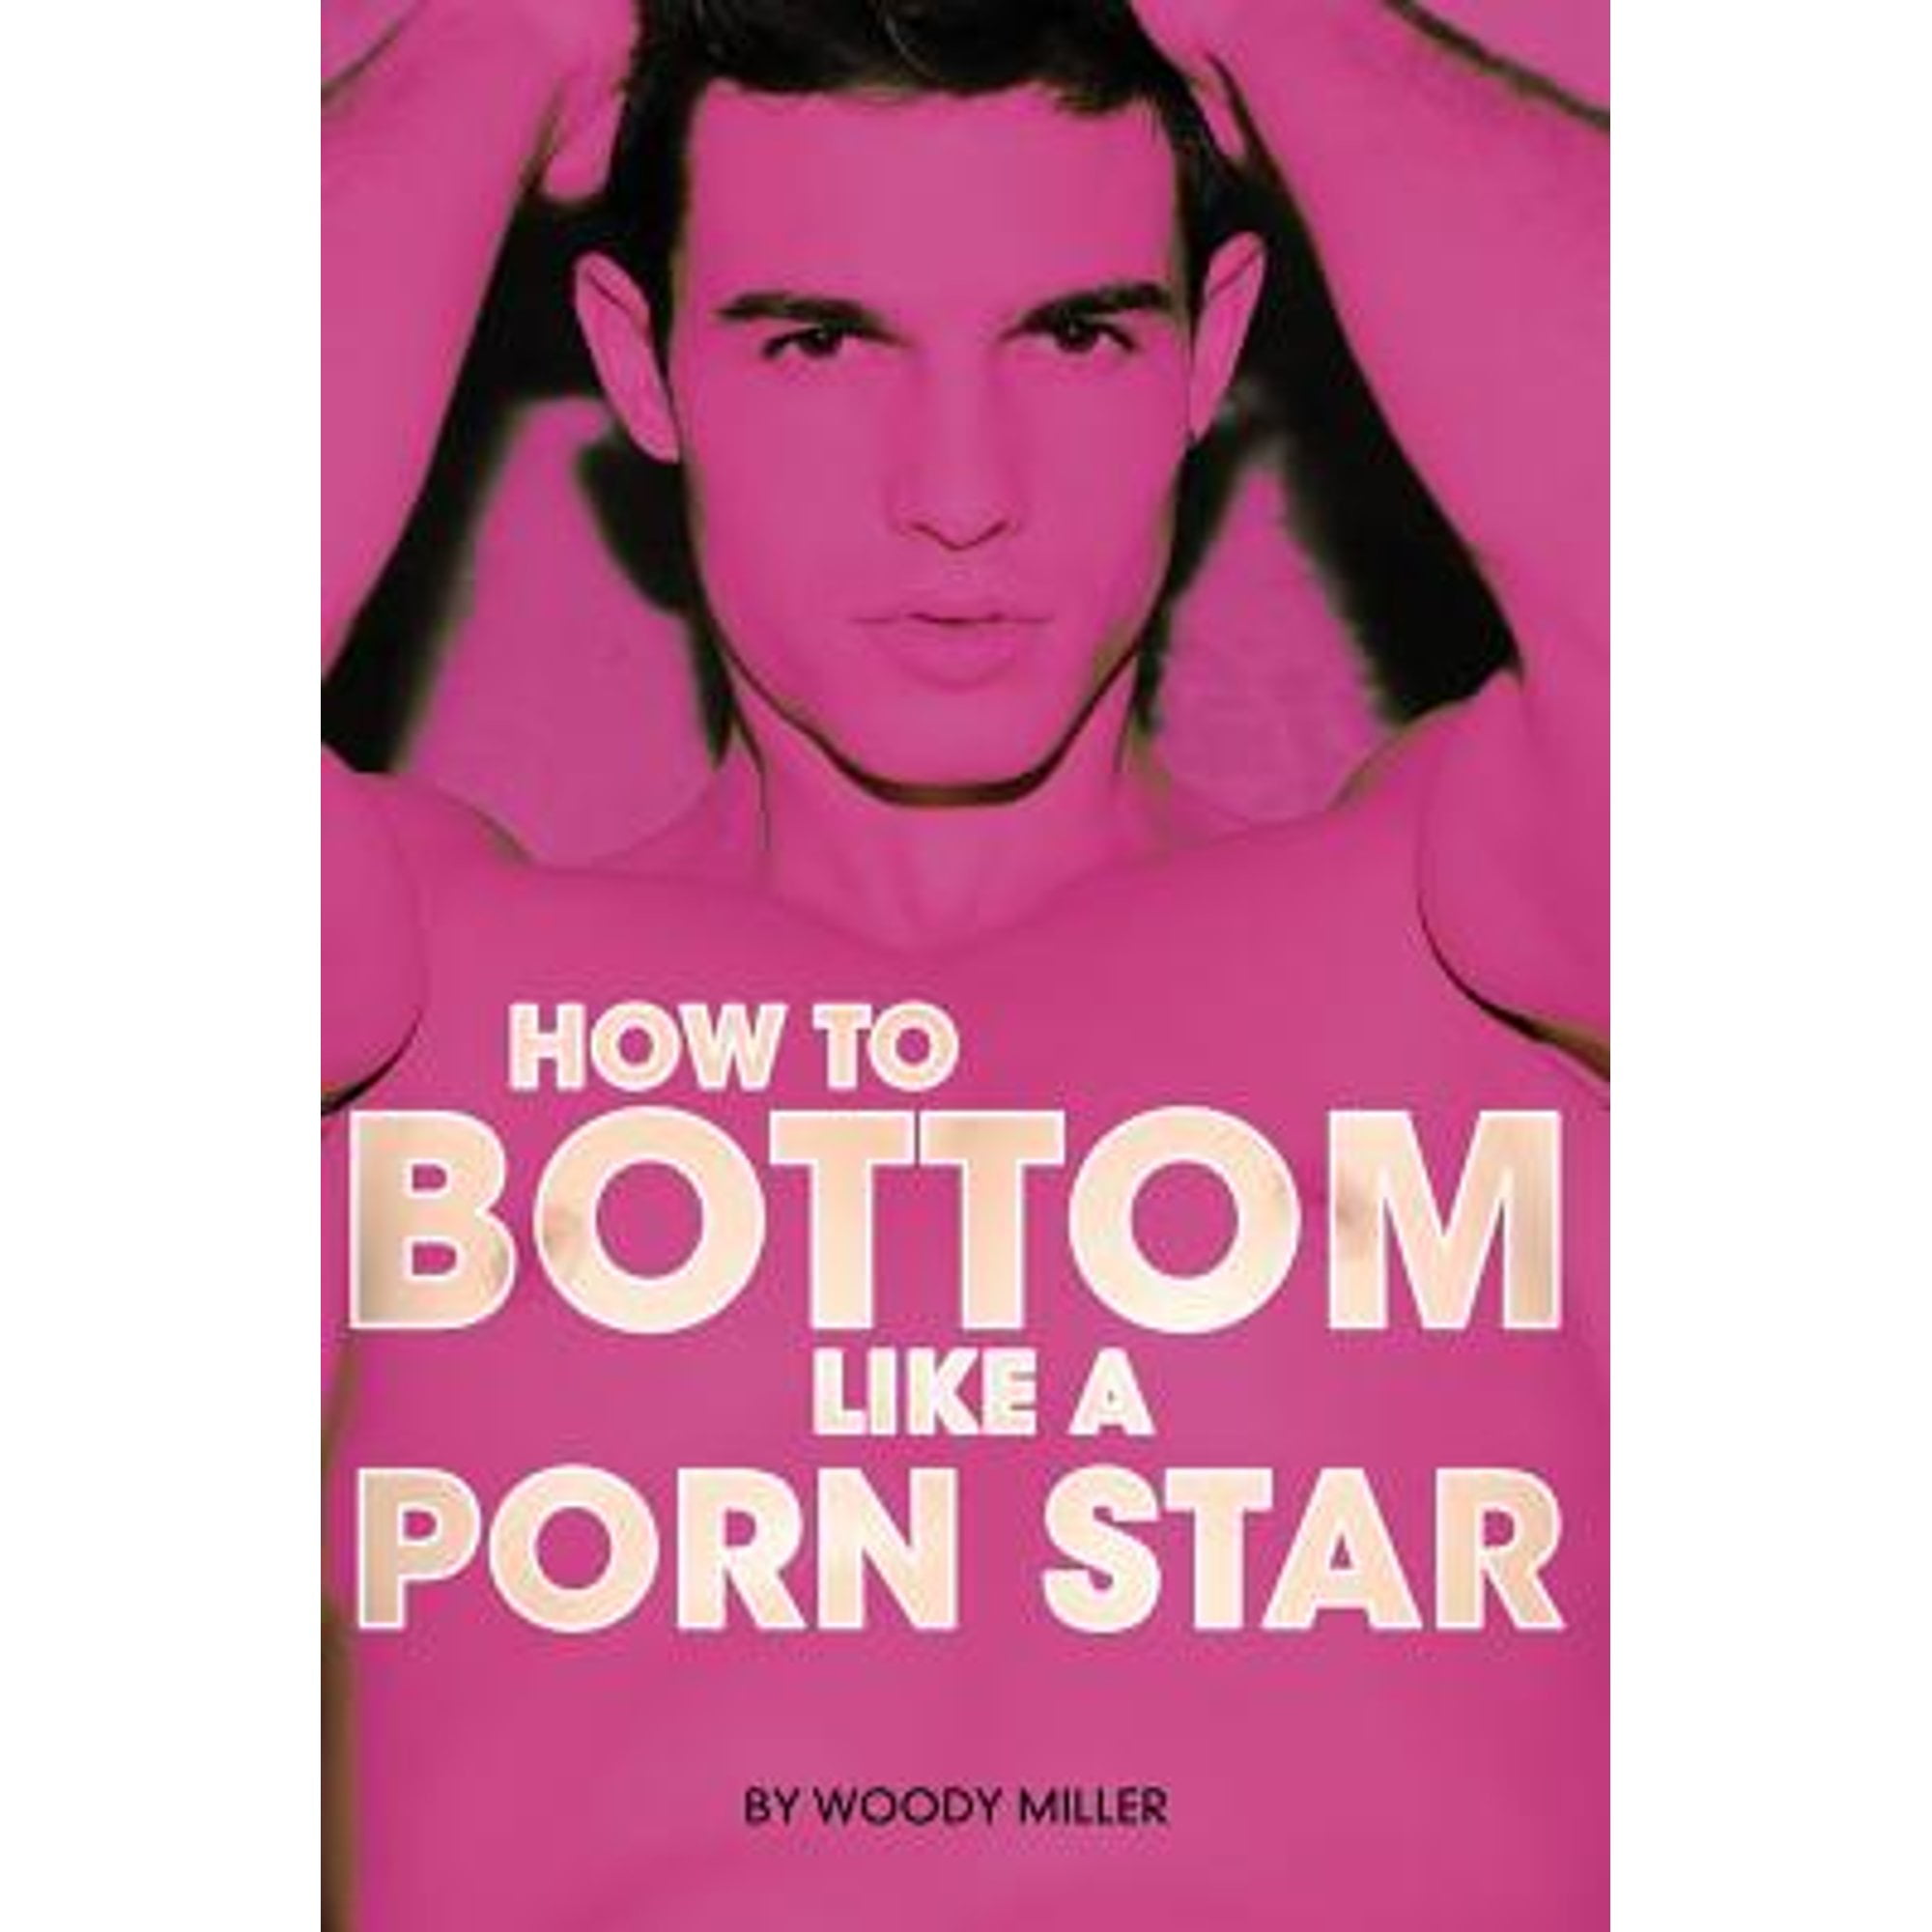 How to Bottom Like a Porn Star. the Guide to Gay Anal Sex. - Walmart.com